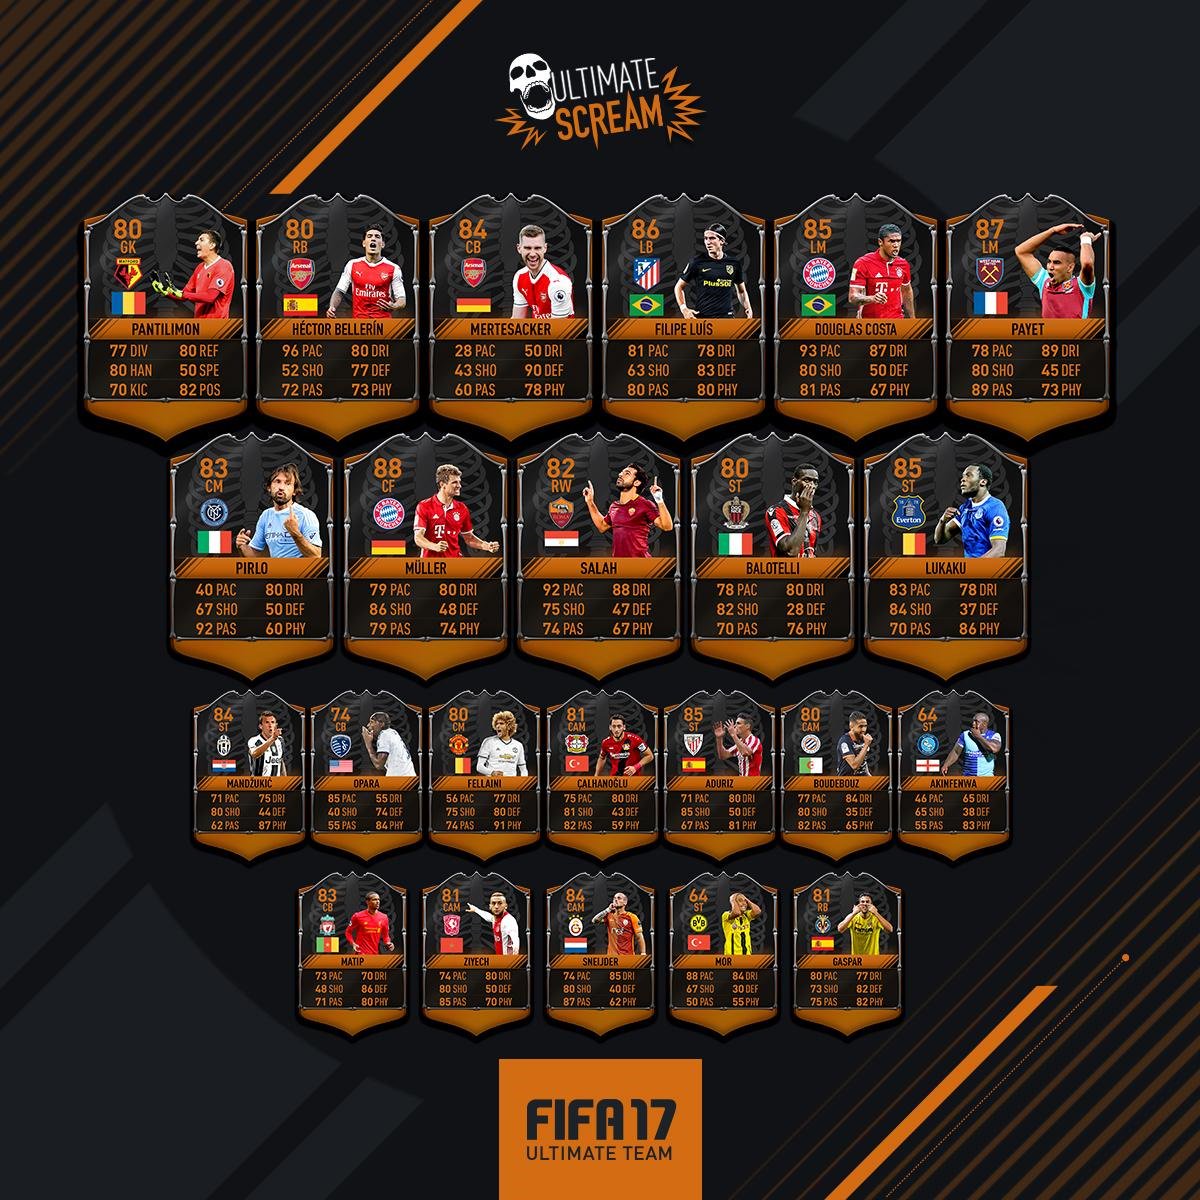 Fifa 21 News On Twitter Fifa 17 Halloween Cards Guide Which Ultimate Scream Team Players Will Receive The Highest Temp Stat Boost Https T Co Tpybqfwwzj Fifa17 Https T Co Hrqmrqc9v8